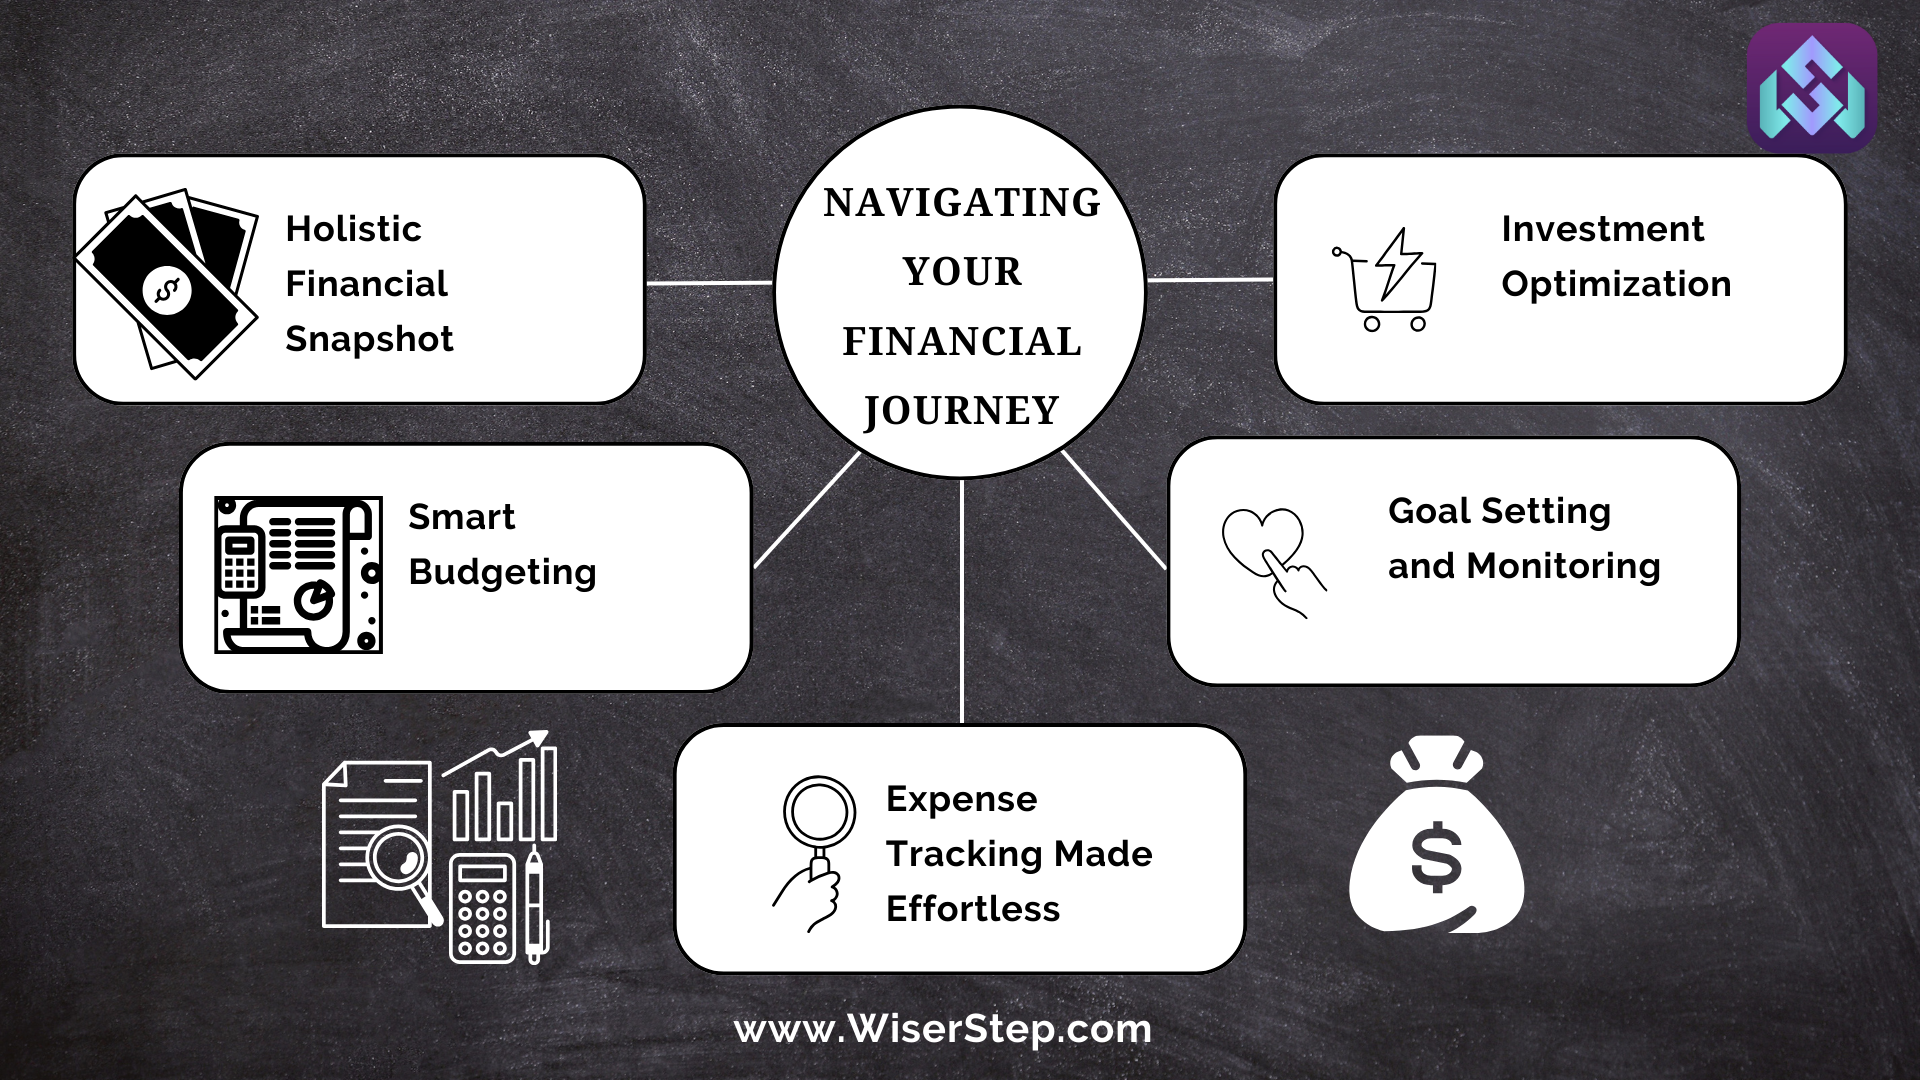 Navigating Your Financial Journey